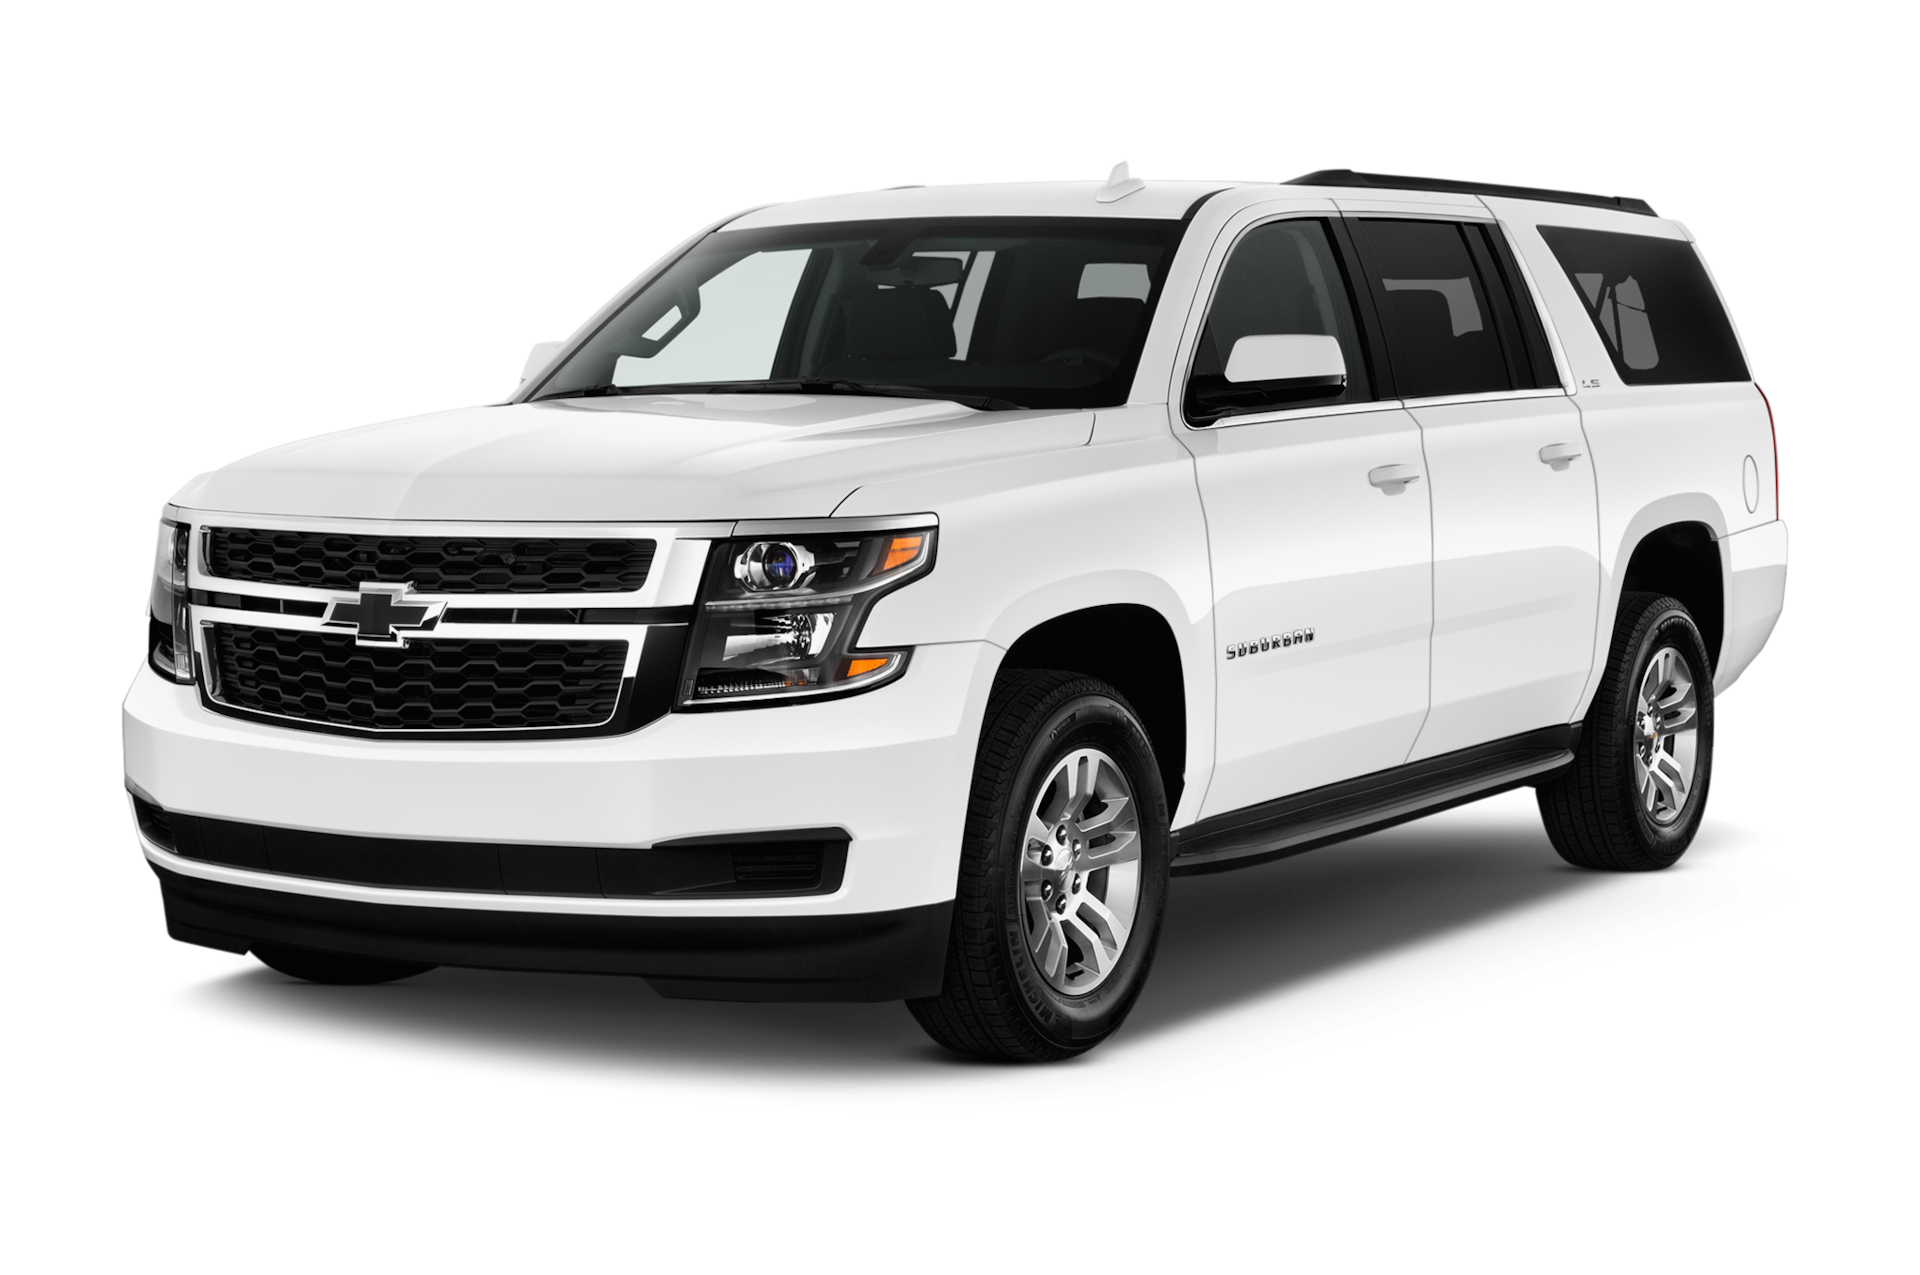 2016 Chevrolet Suburban Prices, Reviews, and Photos - MotorTrend